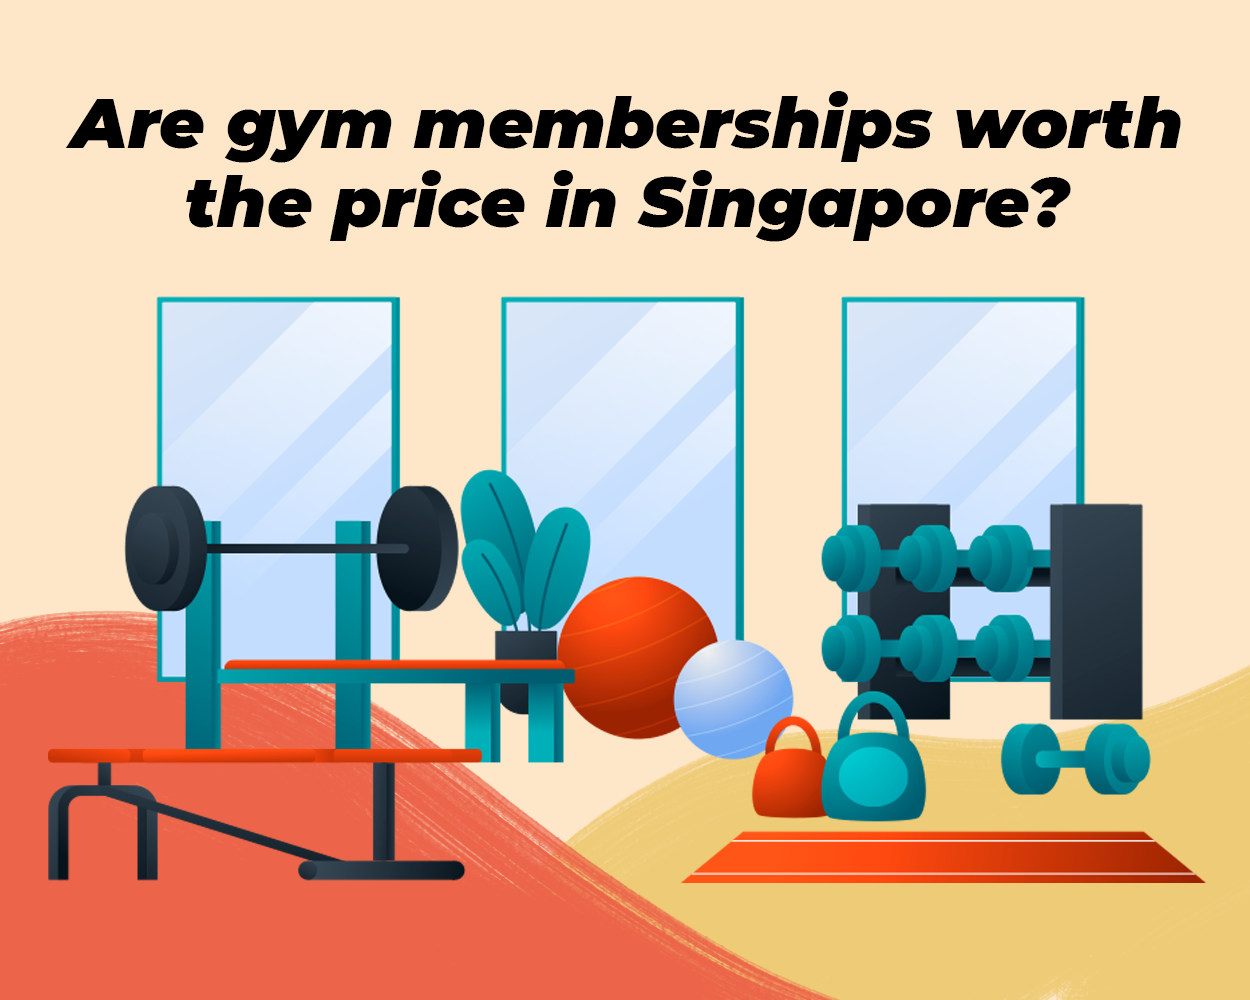 Are gym memberships worth the price in Singapore